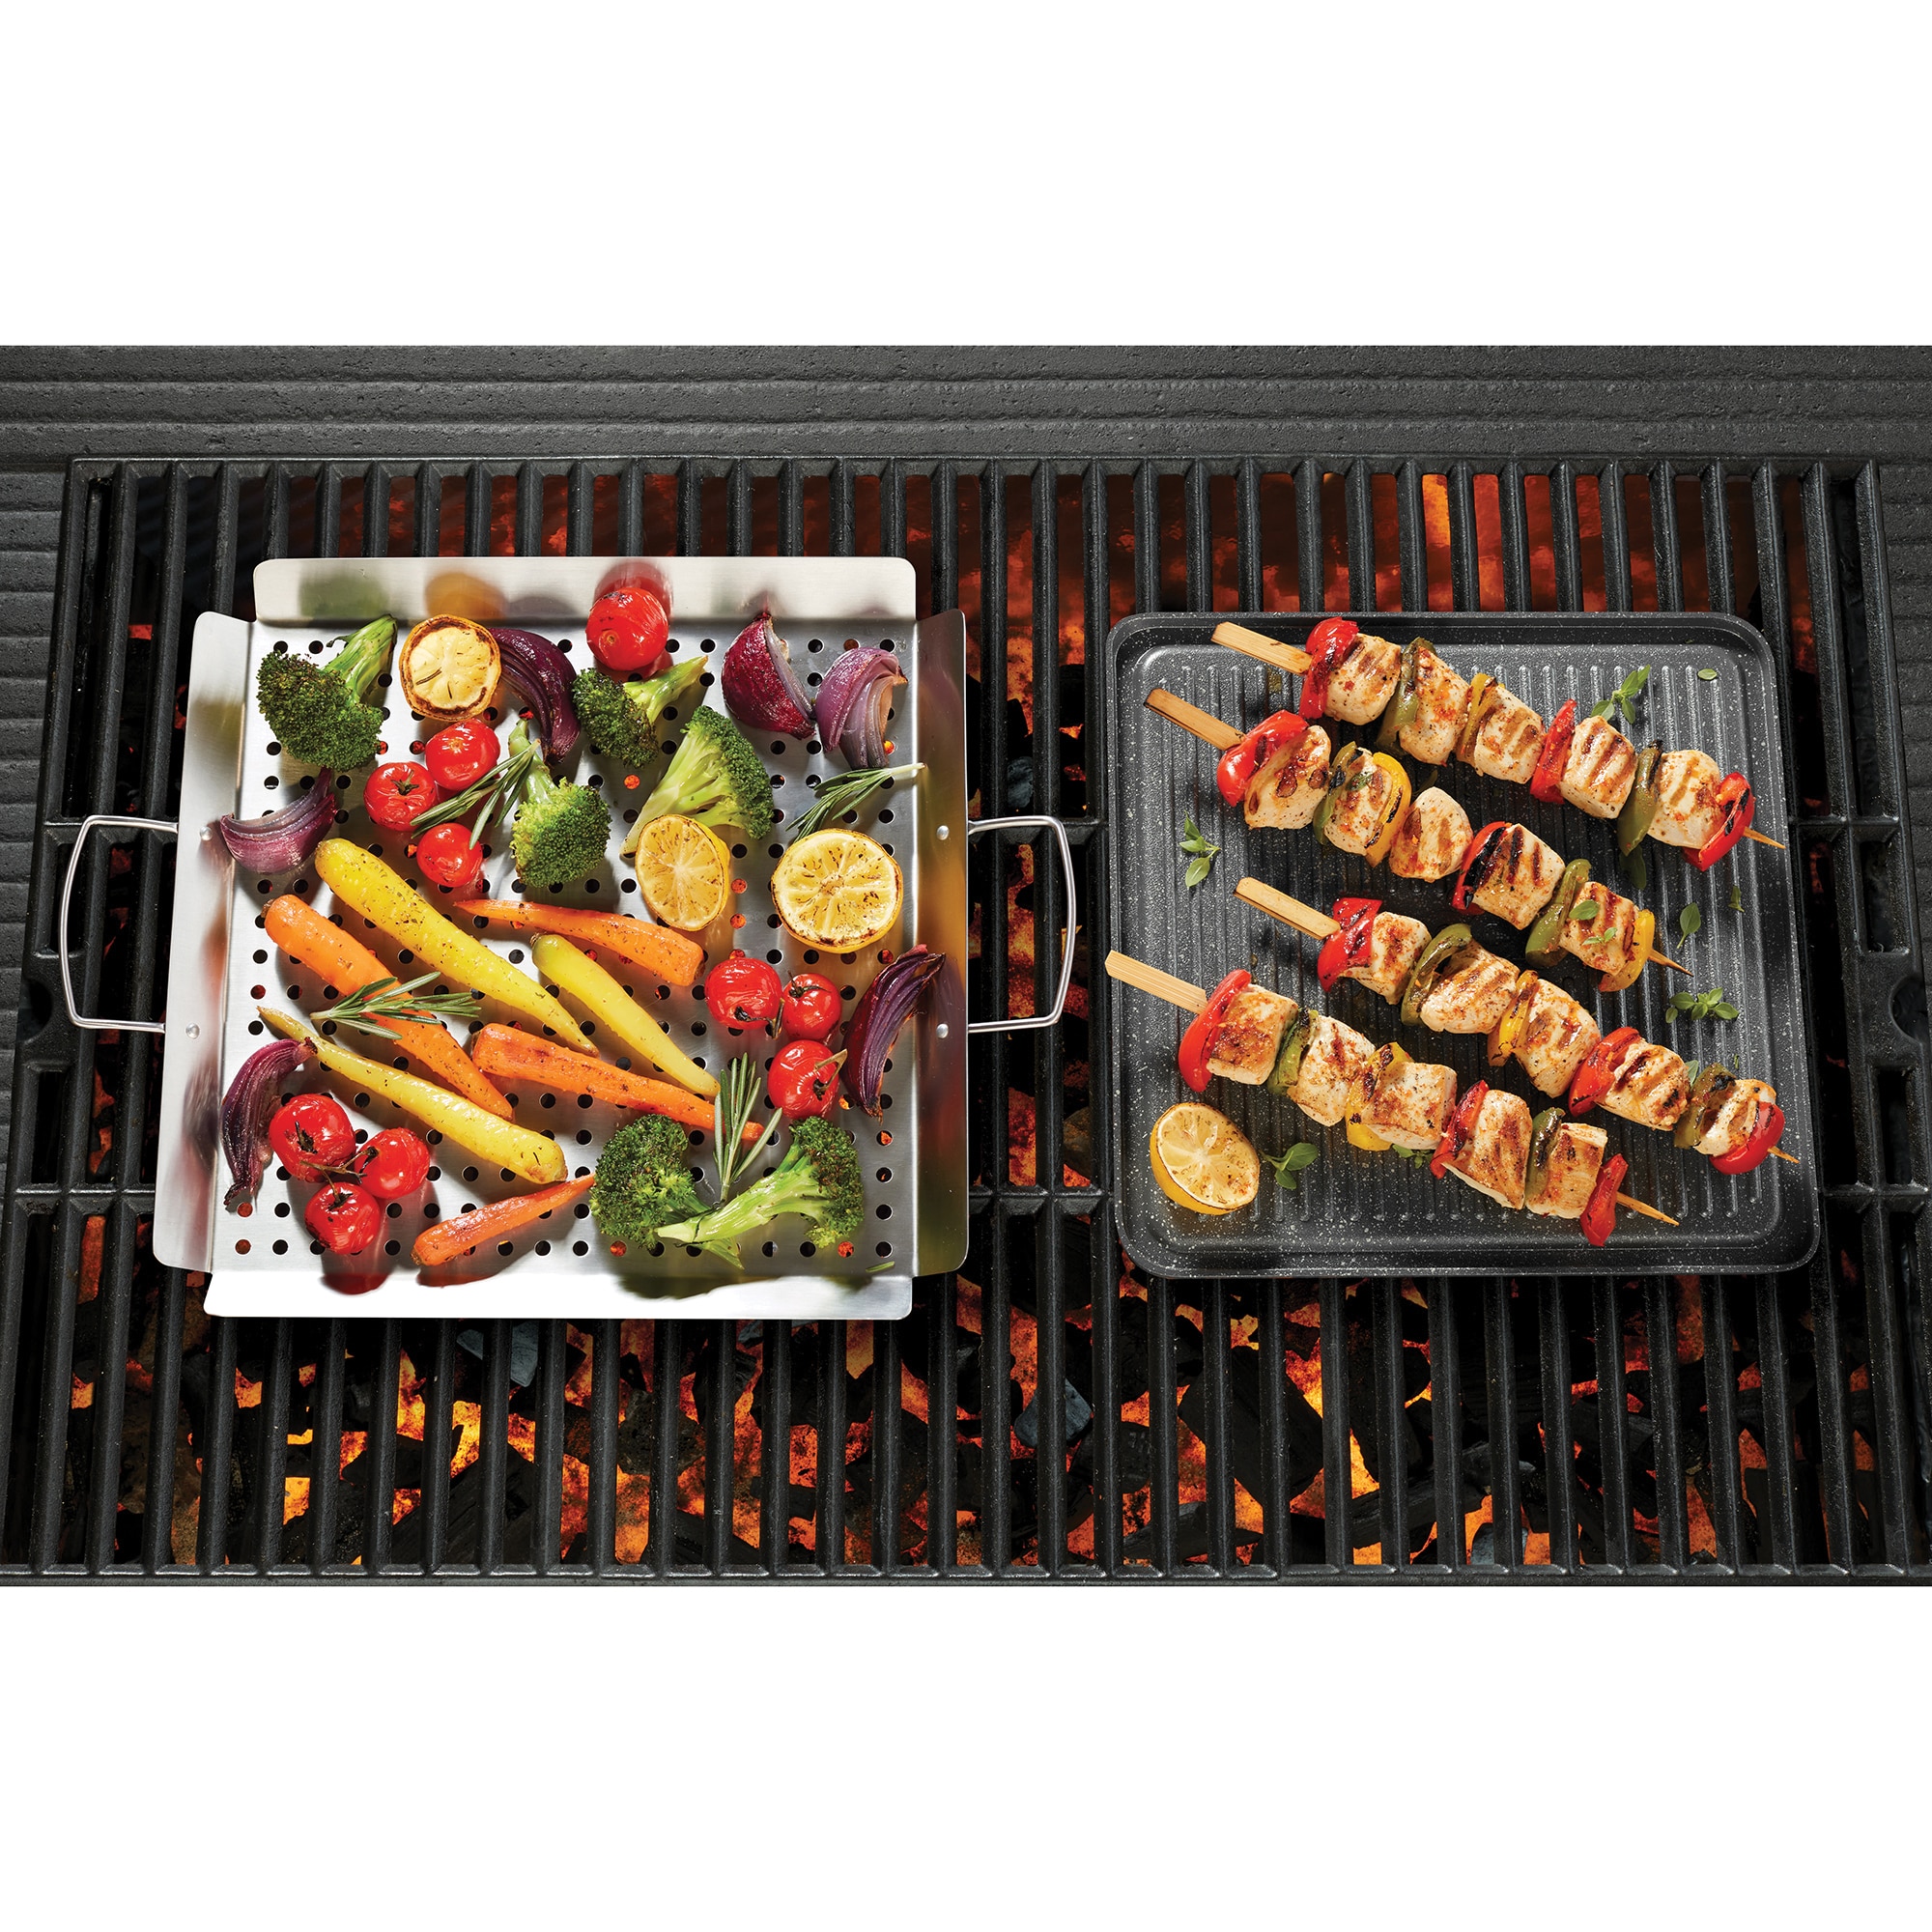 Starfrit THE ROCK Cast Iron Non-stick Griddle and Pan Set in the Grill  Cookware department at